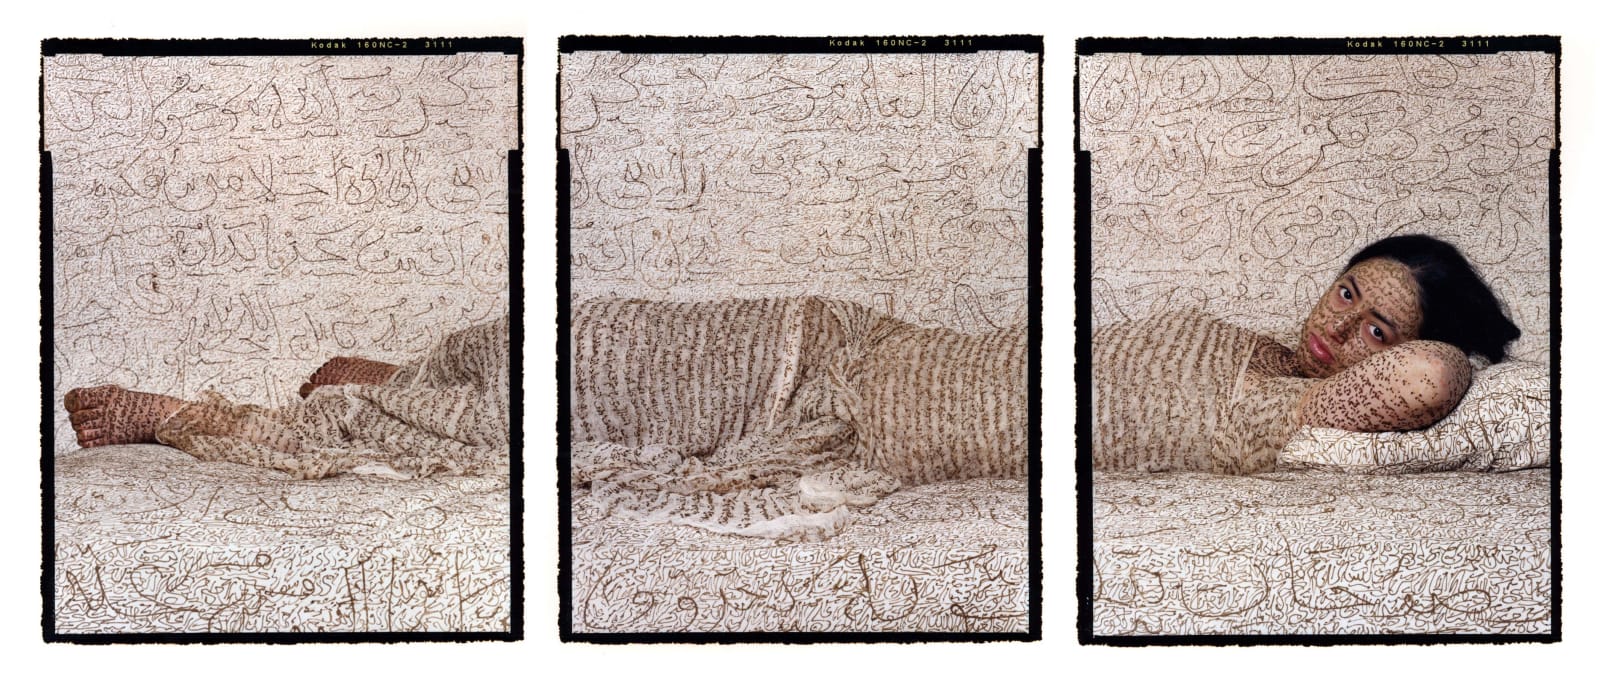 Triptych of woman reclining wearing clothing inscribed with henna calligraphy, by Lalla Essaydi